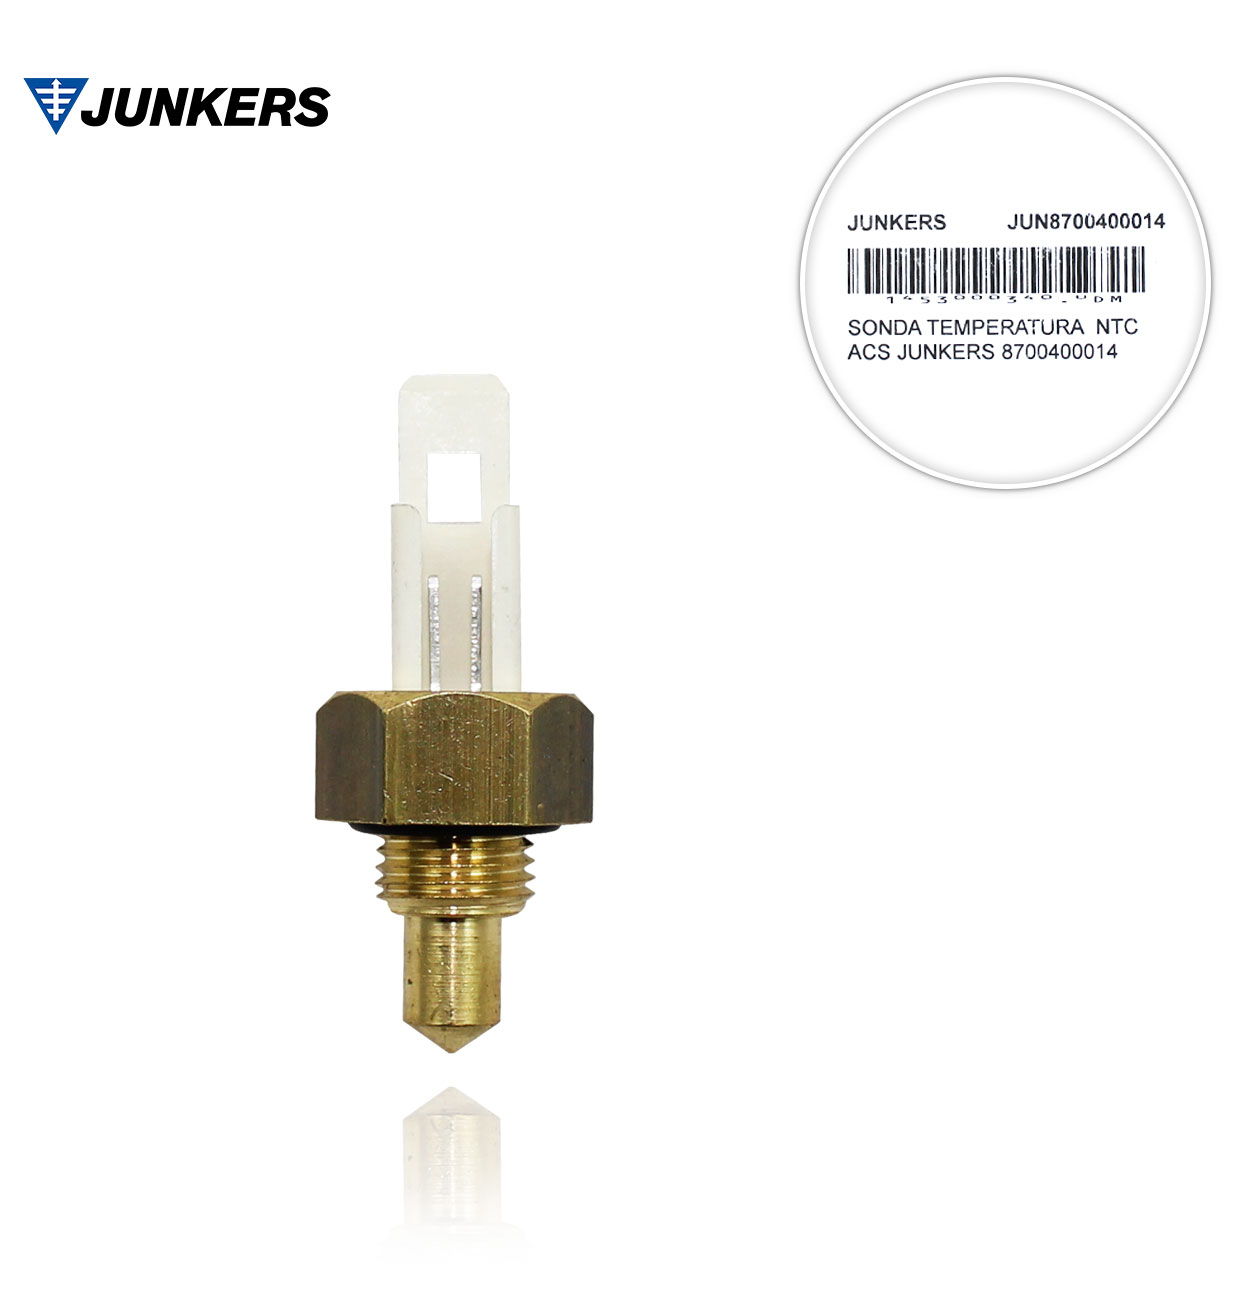 JUNKERS 8700400014 DHW NTC TEMPERATURE PROBE